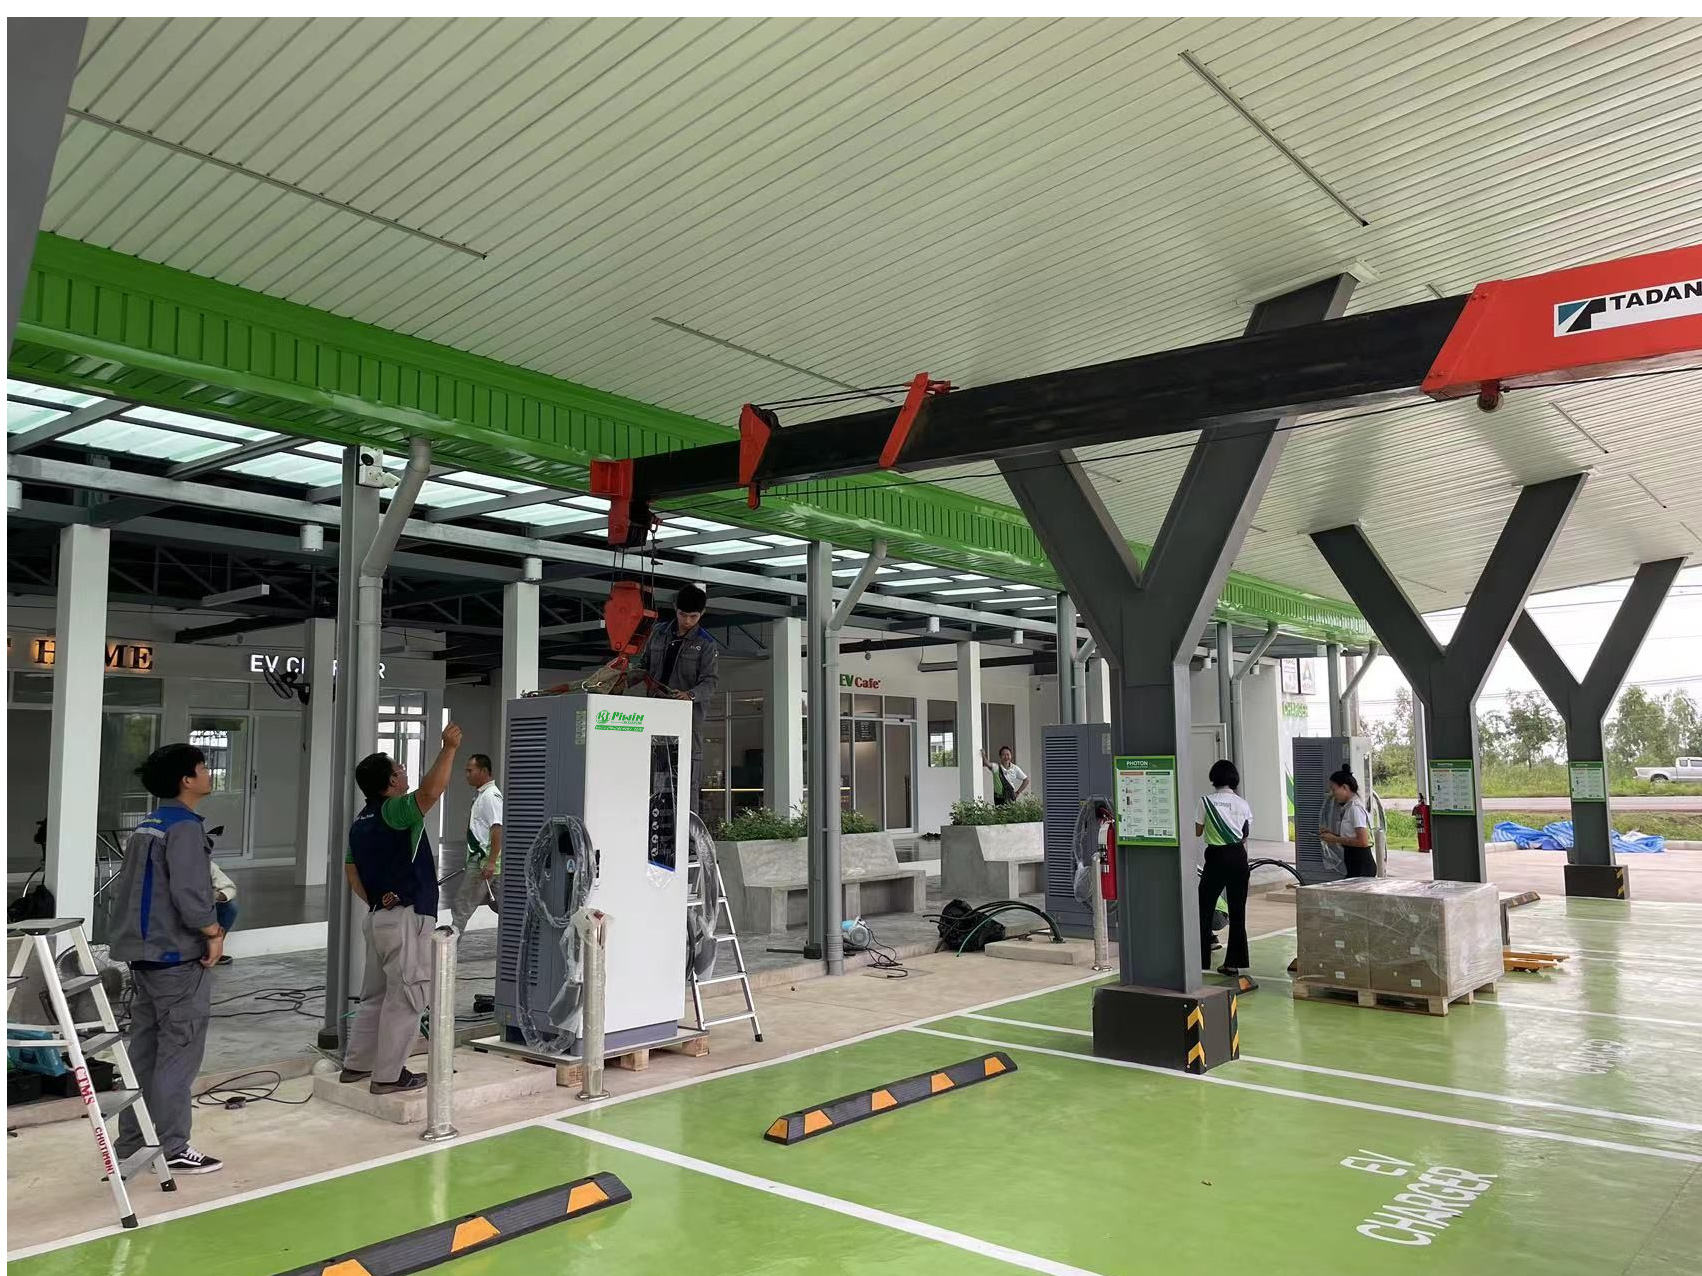 Installation of a DC EV Charging Station by Pilot x Piwin in an urban area of Singapore, showcasing the company's commitment to expanding electric vehicle infrastructure.